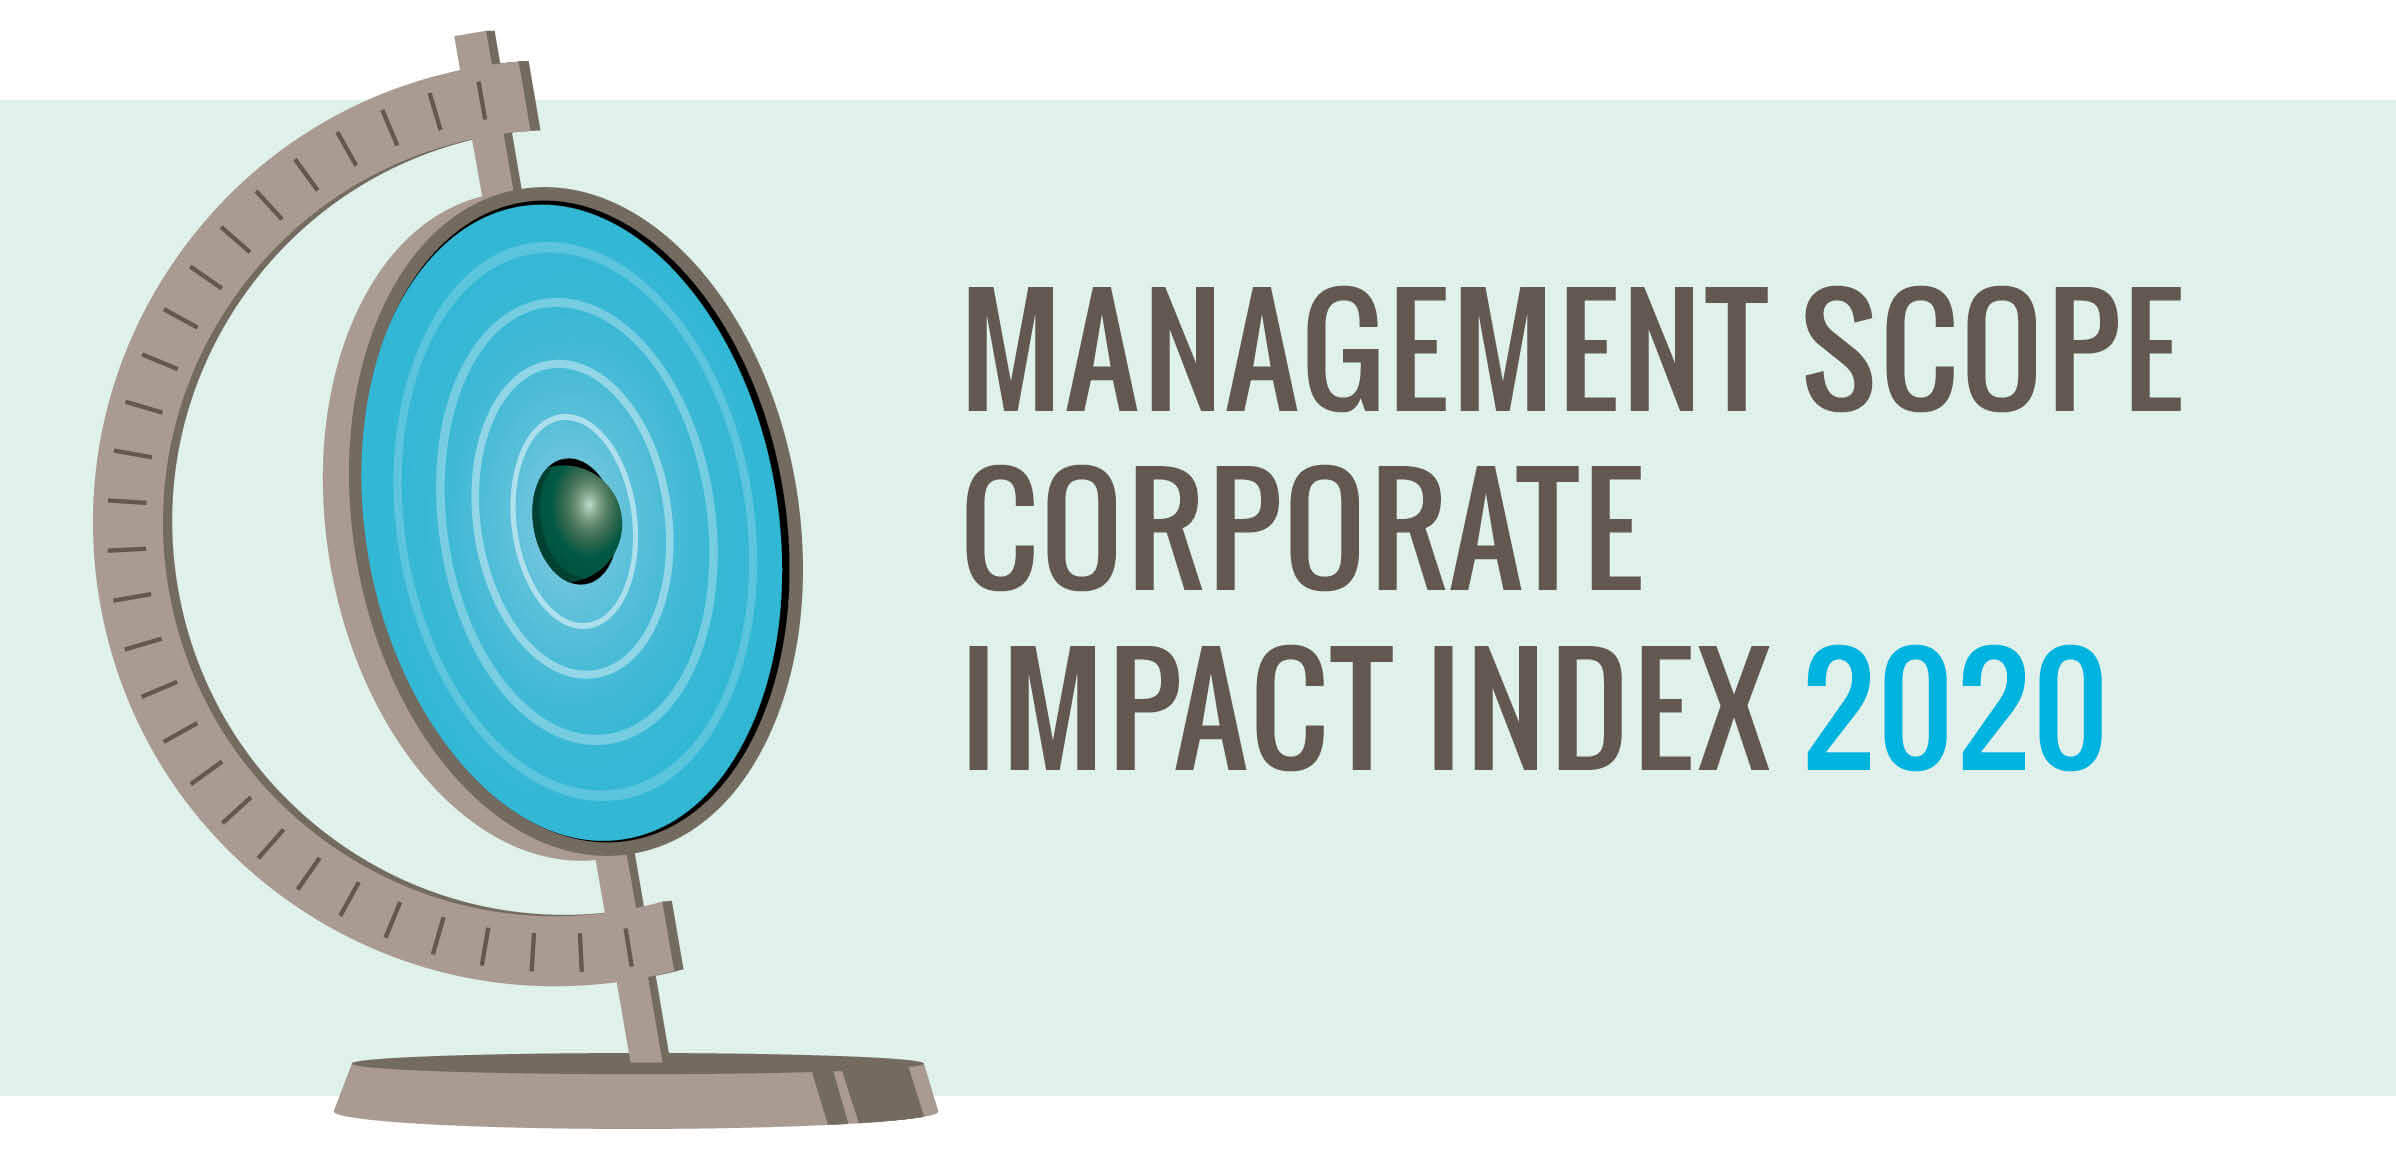 Analyse Management Scope Corporate Impact Index 2020: Oog voor álle stakeholders